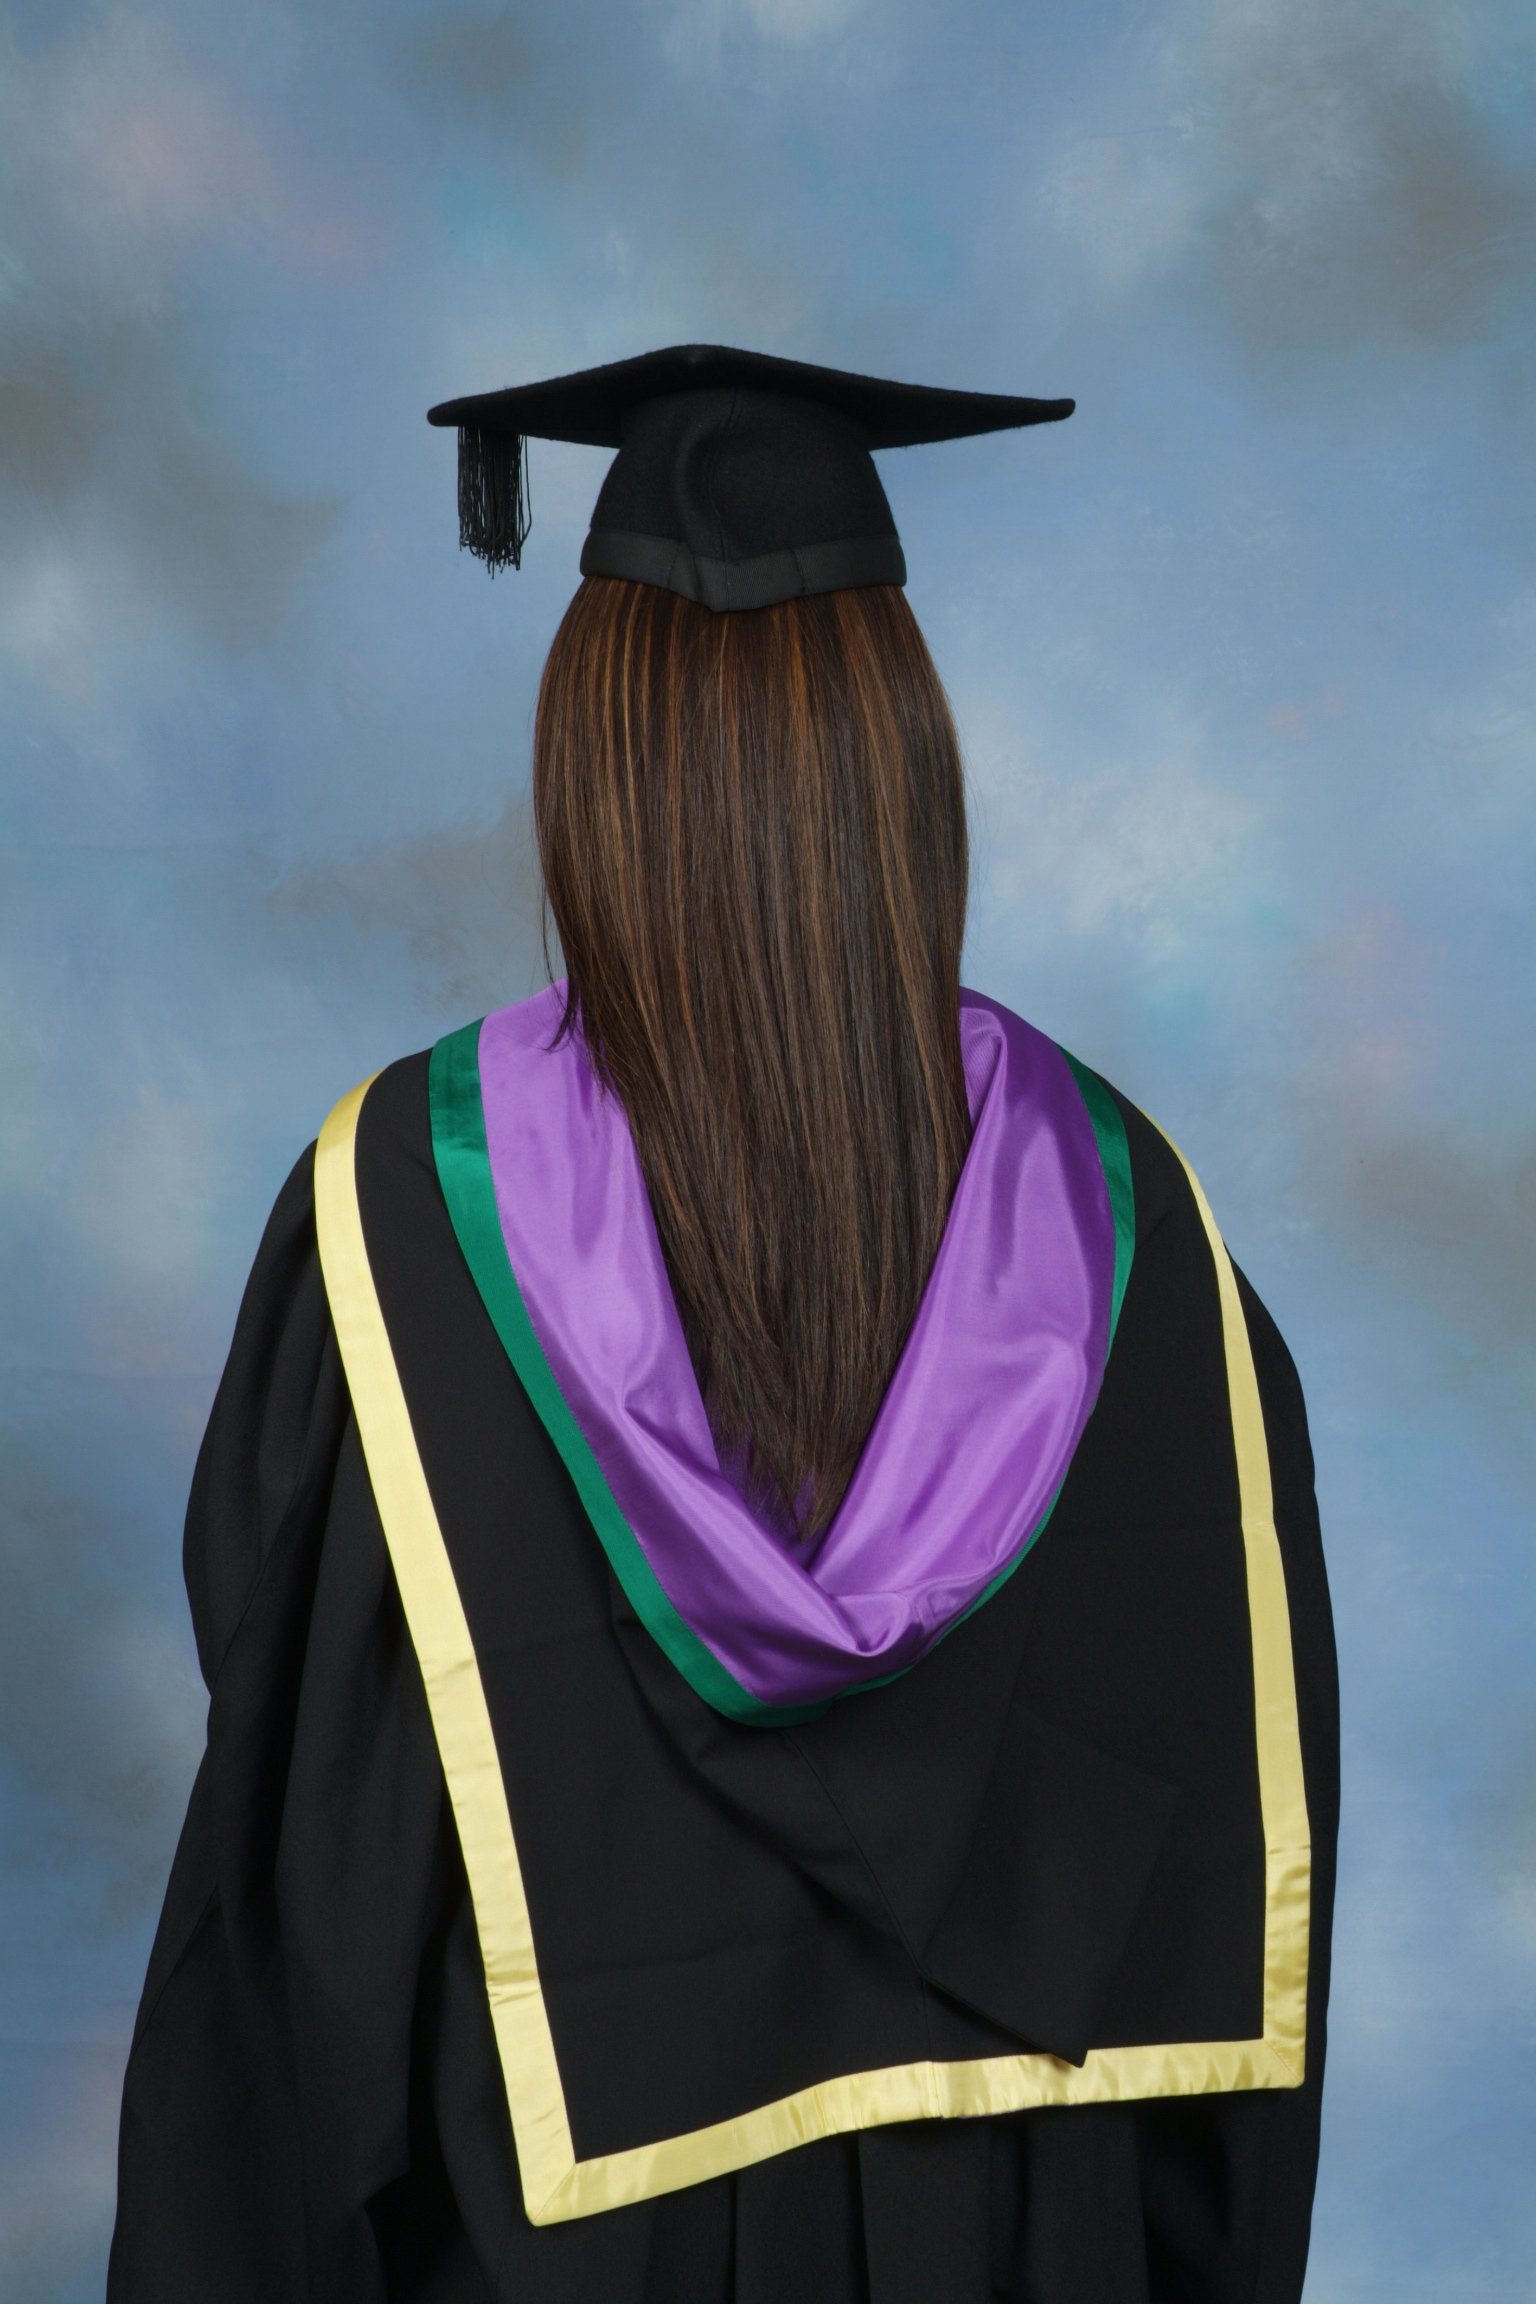 The gown worn by Masters Degree graduands.